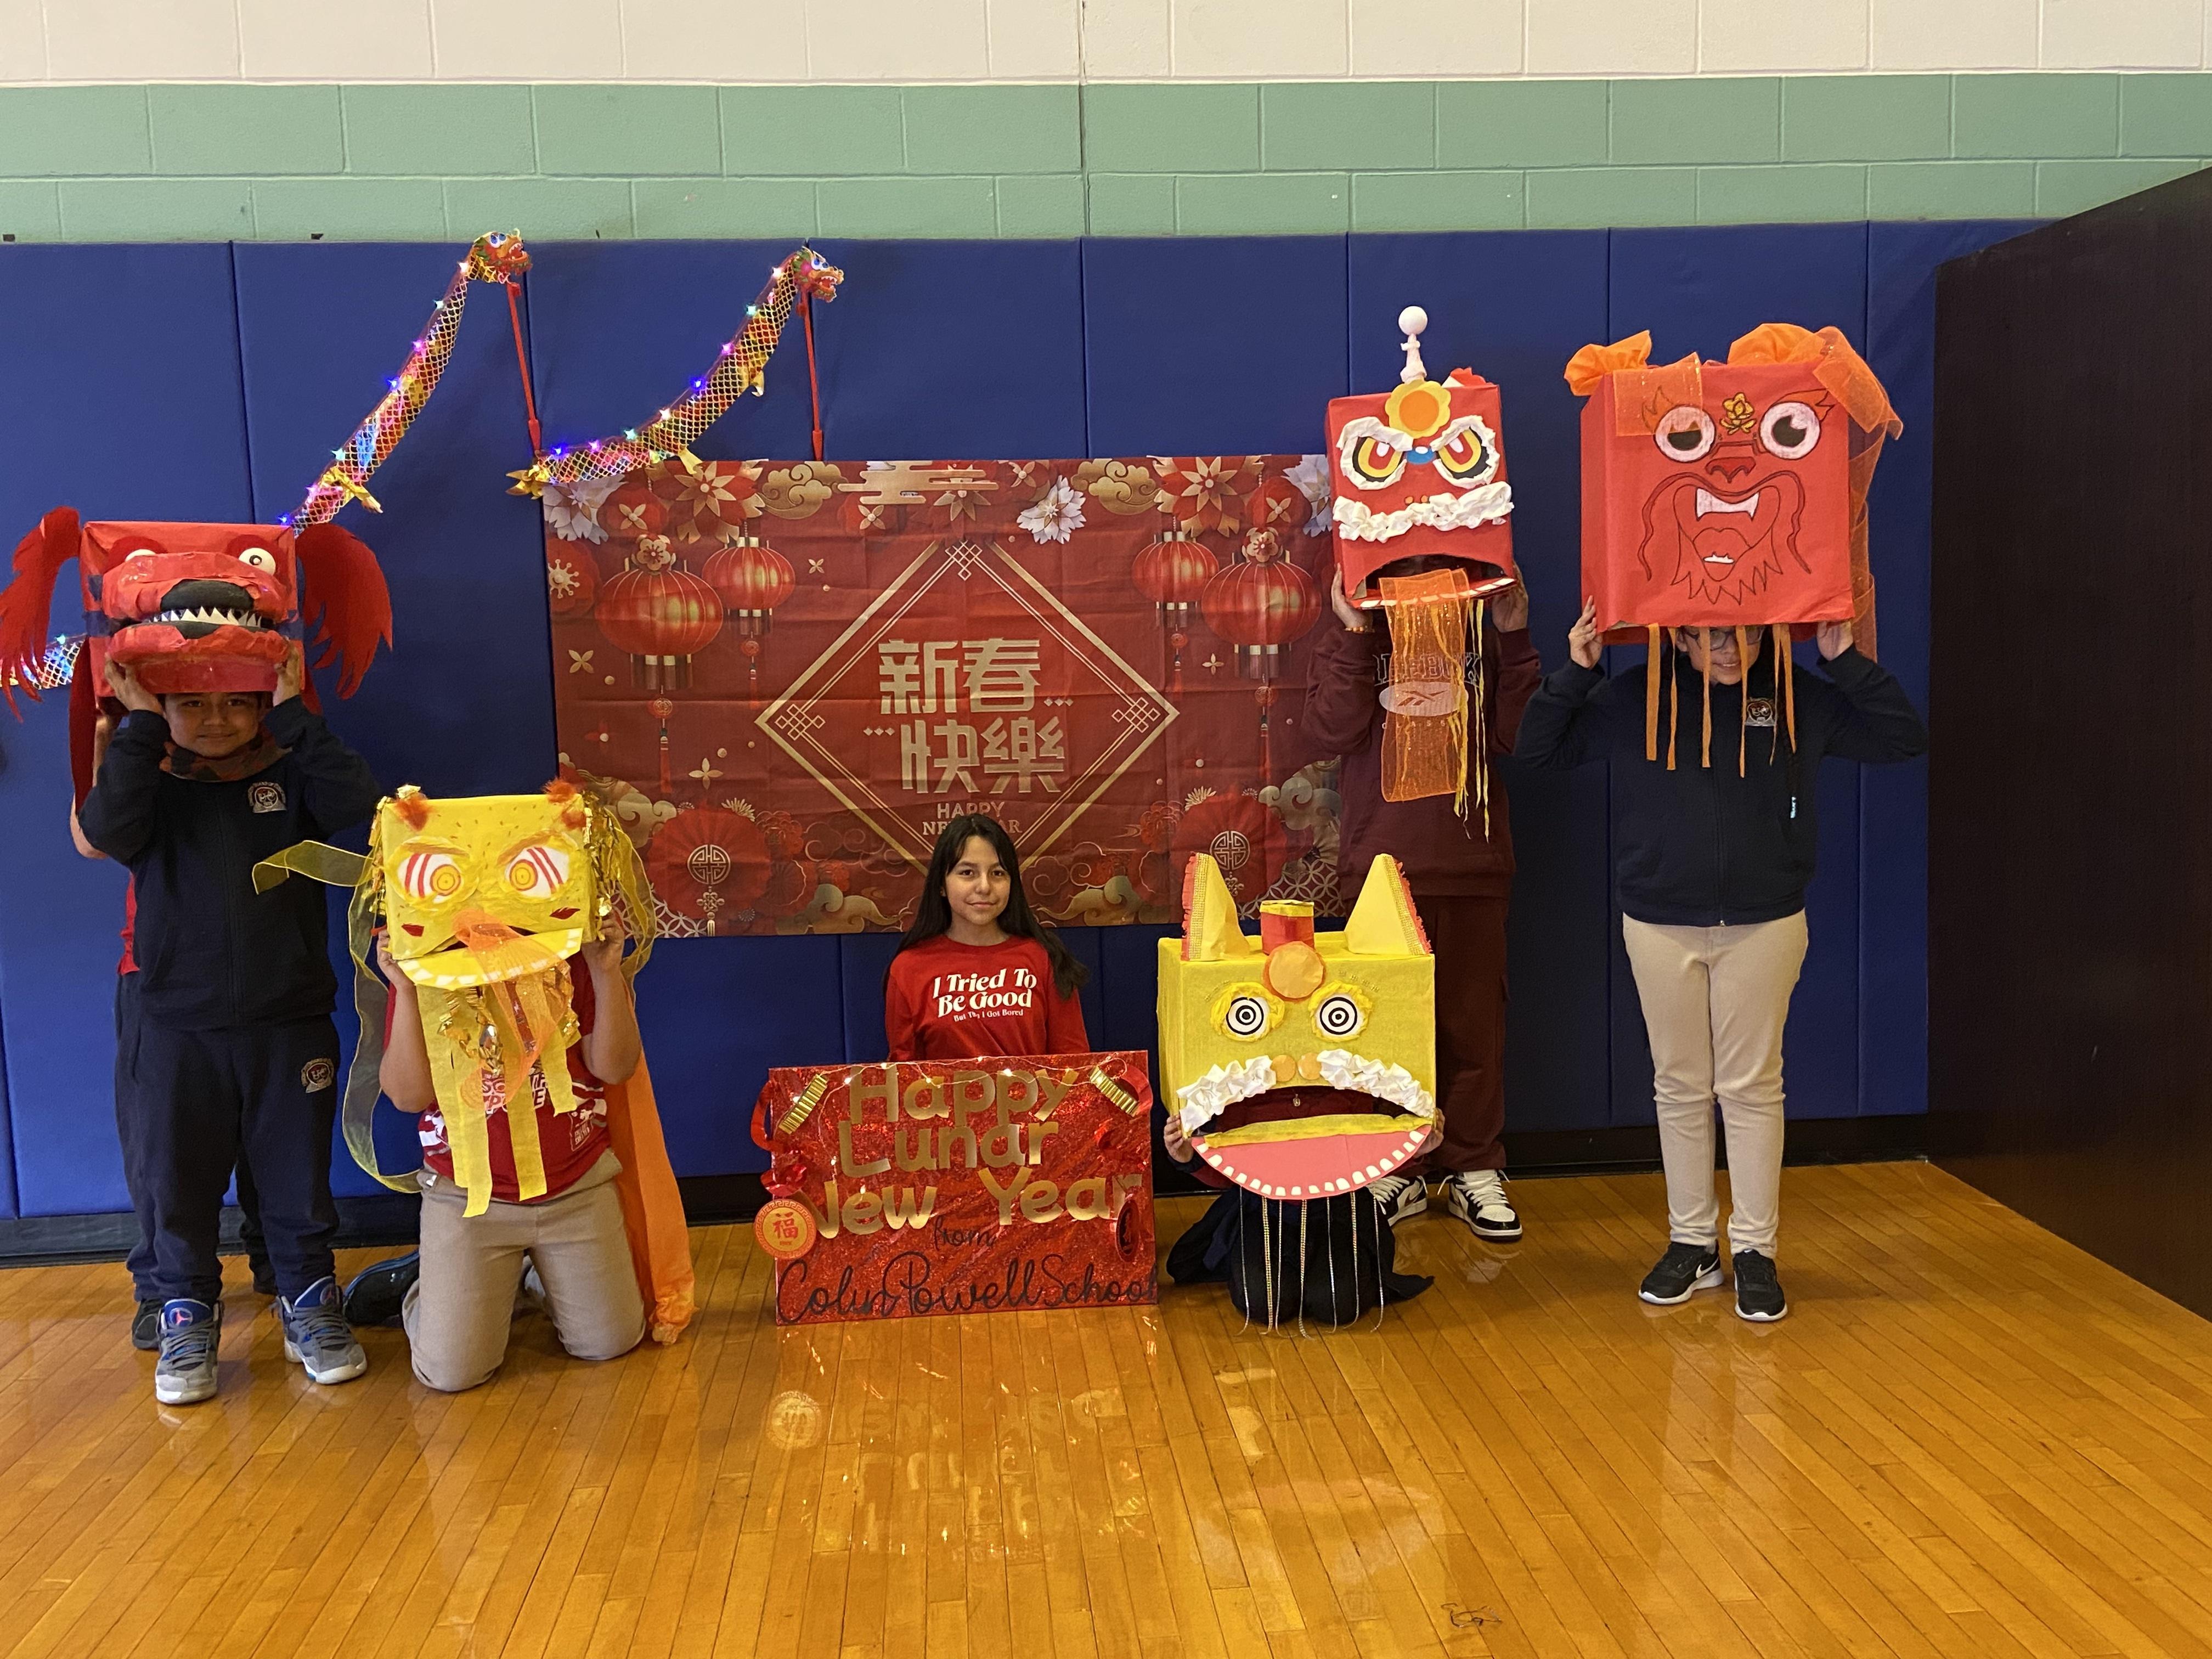 Celebrating The Lunar New Year at the Colin Powell School